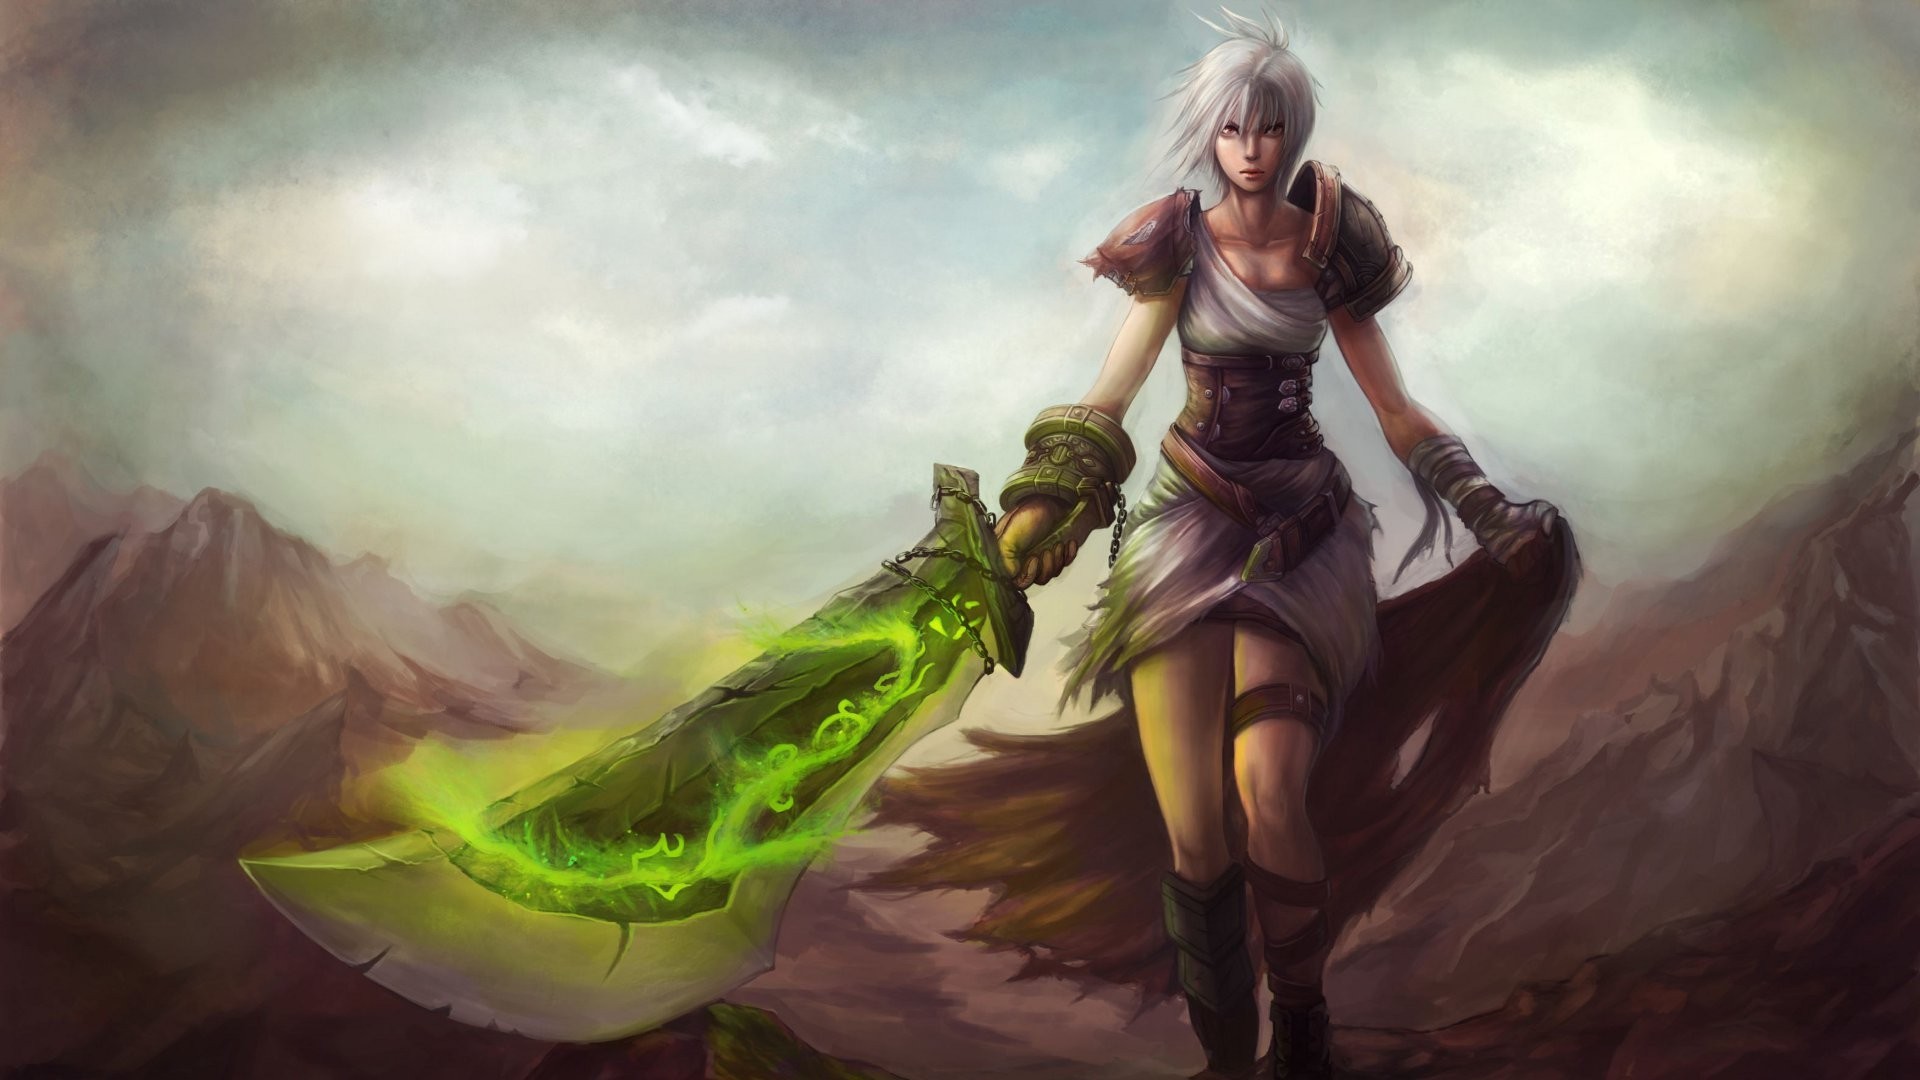 Wallpaper ID: 373060 / Video Game League Of Legends Phone Wallpaper, Riven  (League Of Legends), 1080x2160 free download